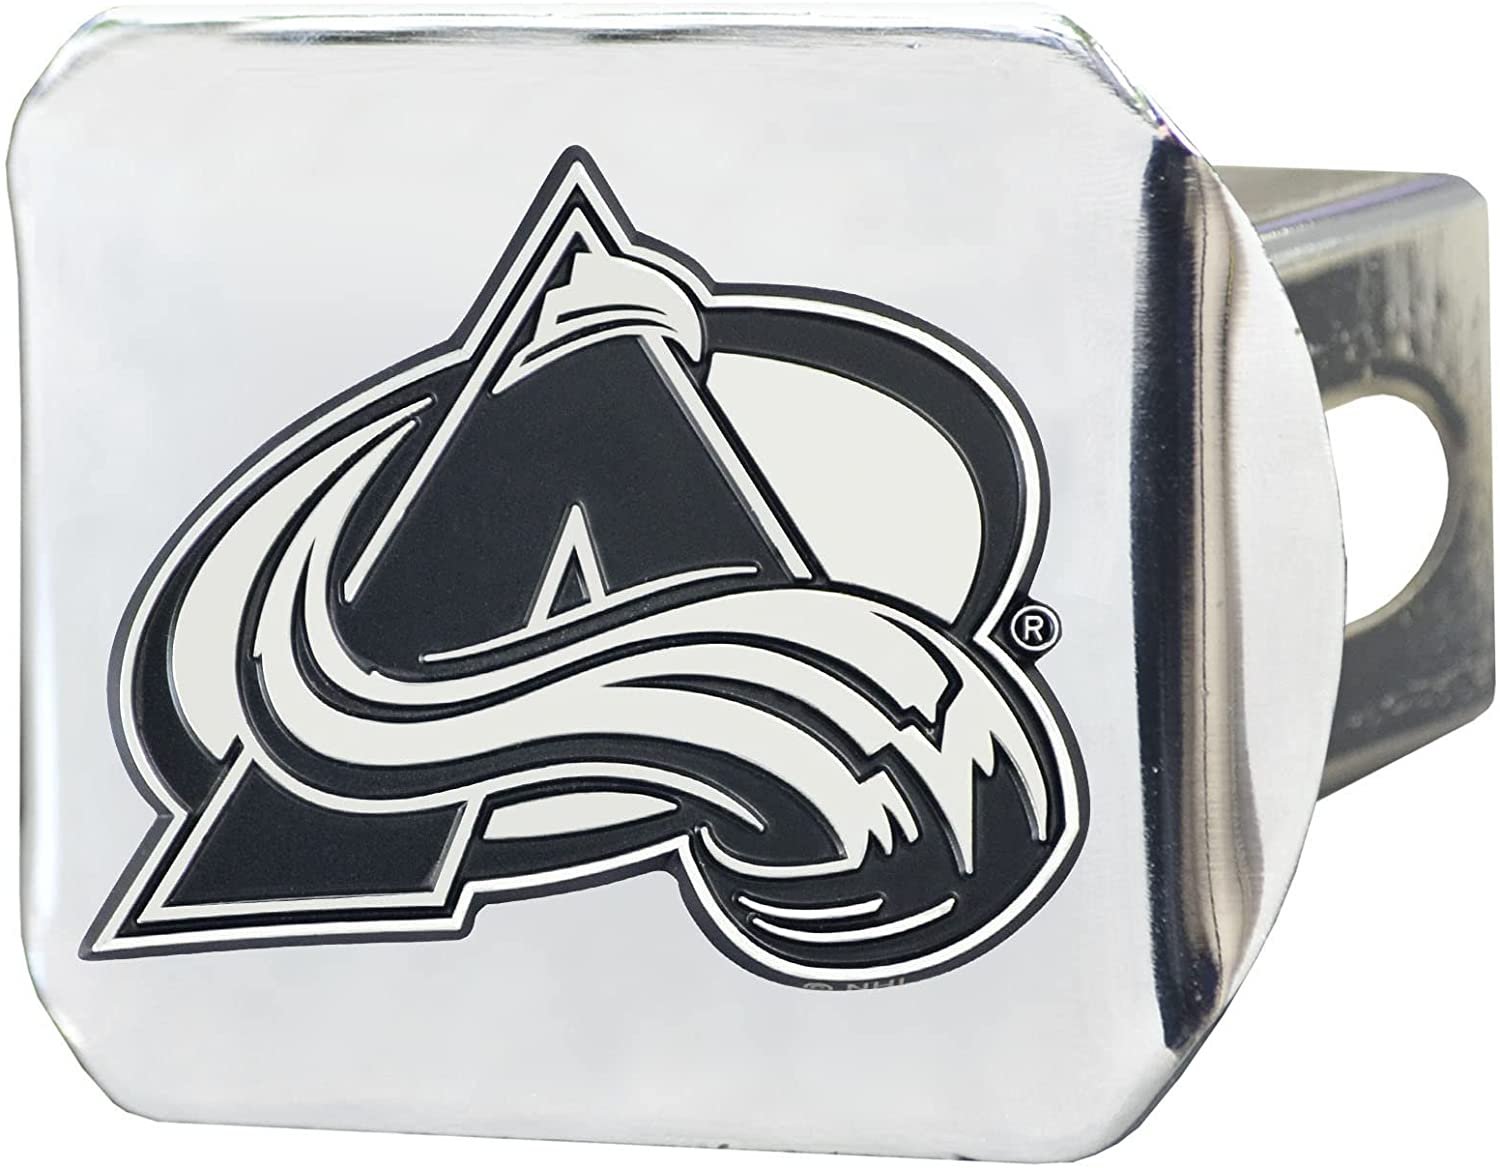 Colorado Avalanche Solid Metal Hitch Cover with Chrome Metal Emblem 2 Inch Square Type III